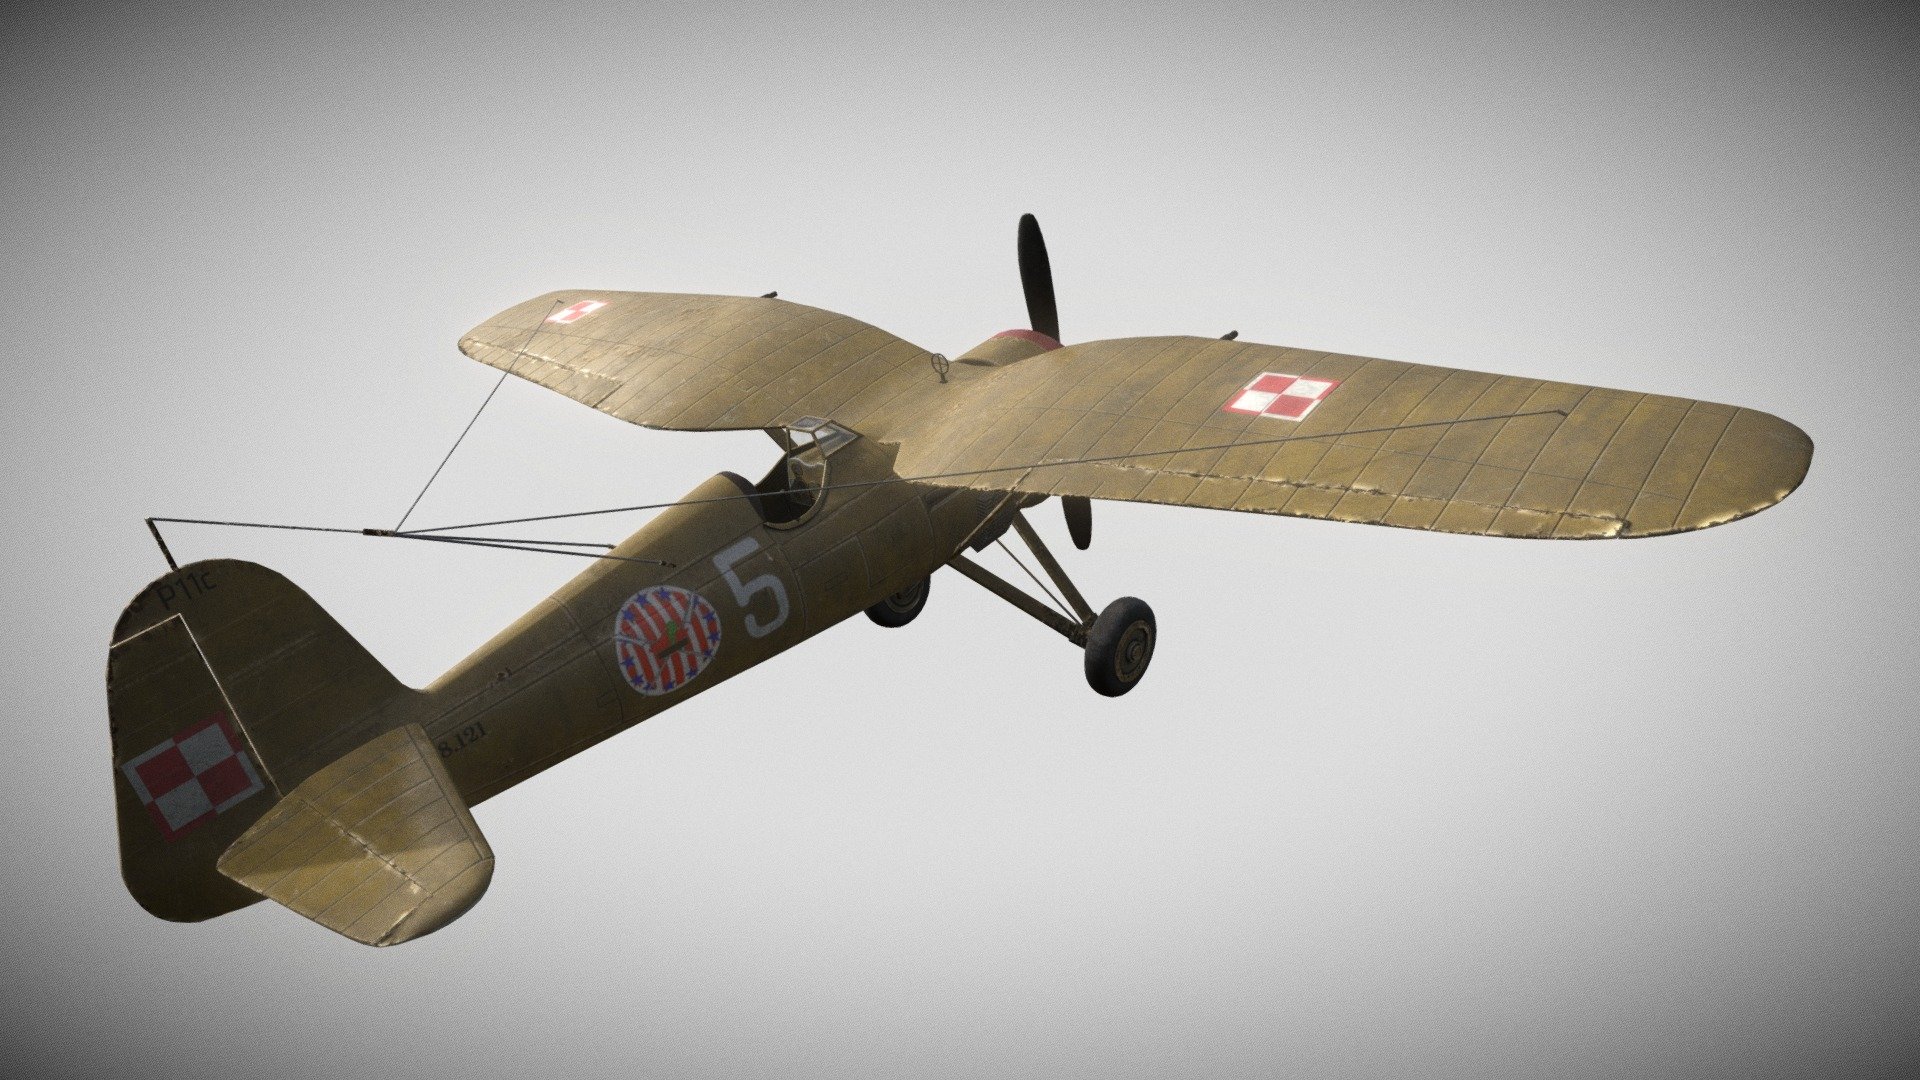 The PZL P.11 was a Polish fighter aircraft, designed and constructed during the early 1930s by Warsaw-based aircraft manufacturer PZL. Possessing an all-metal structure, metal-covering, and high-mounted gull wing, the type held the distinction of being widely considered to have briefly been the most advanced fighter aircraft of its kind in the world 3d model